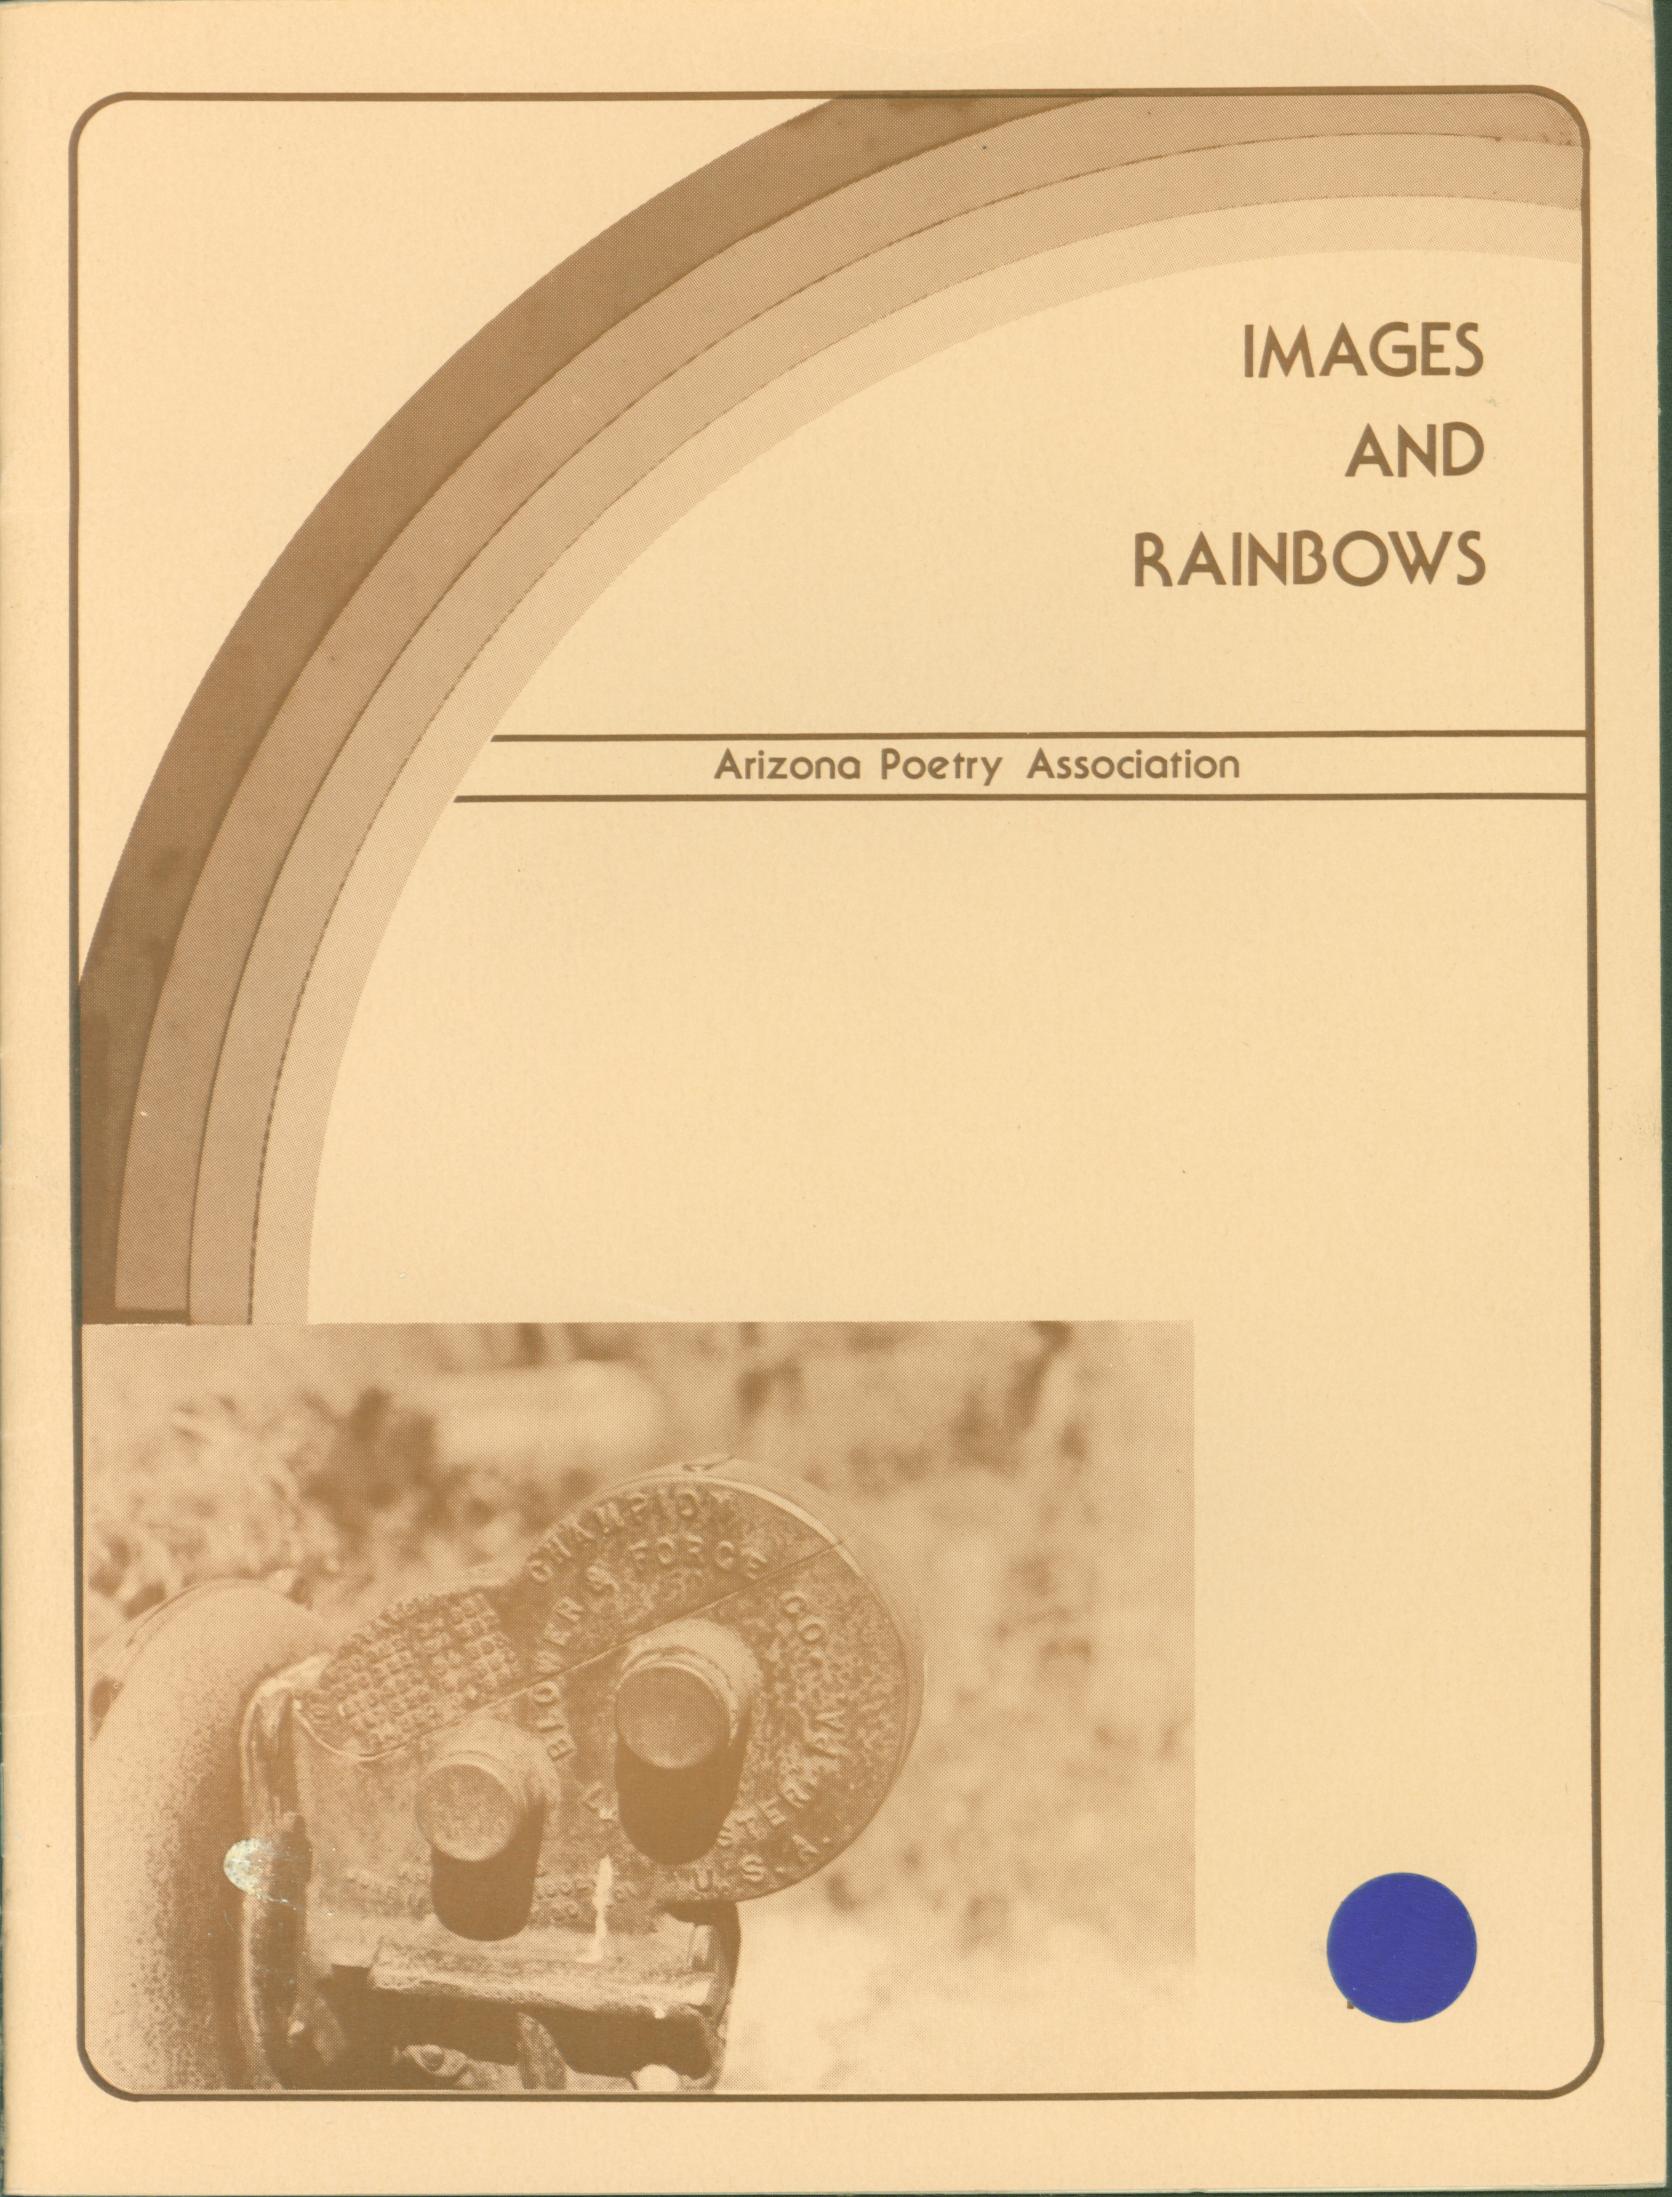 IMAGES AND RAINBOWS. Vol. 1, 1980 Journal of Arizona Poetry Assn. 